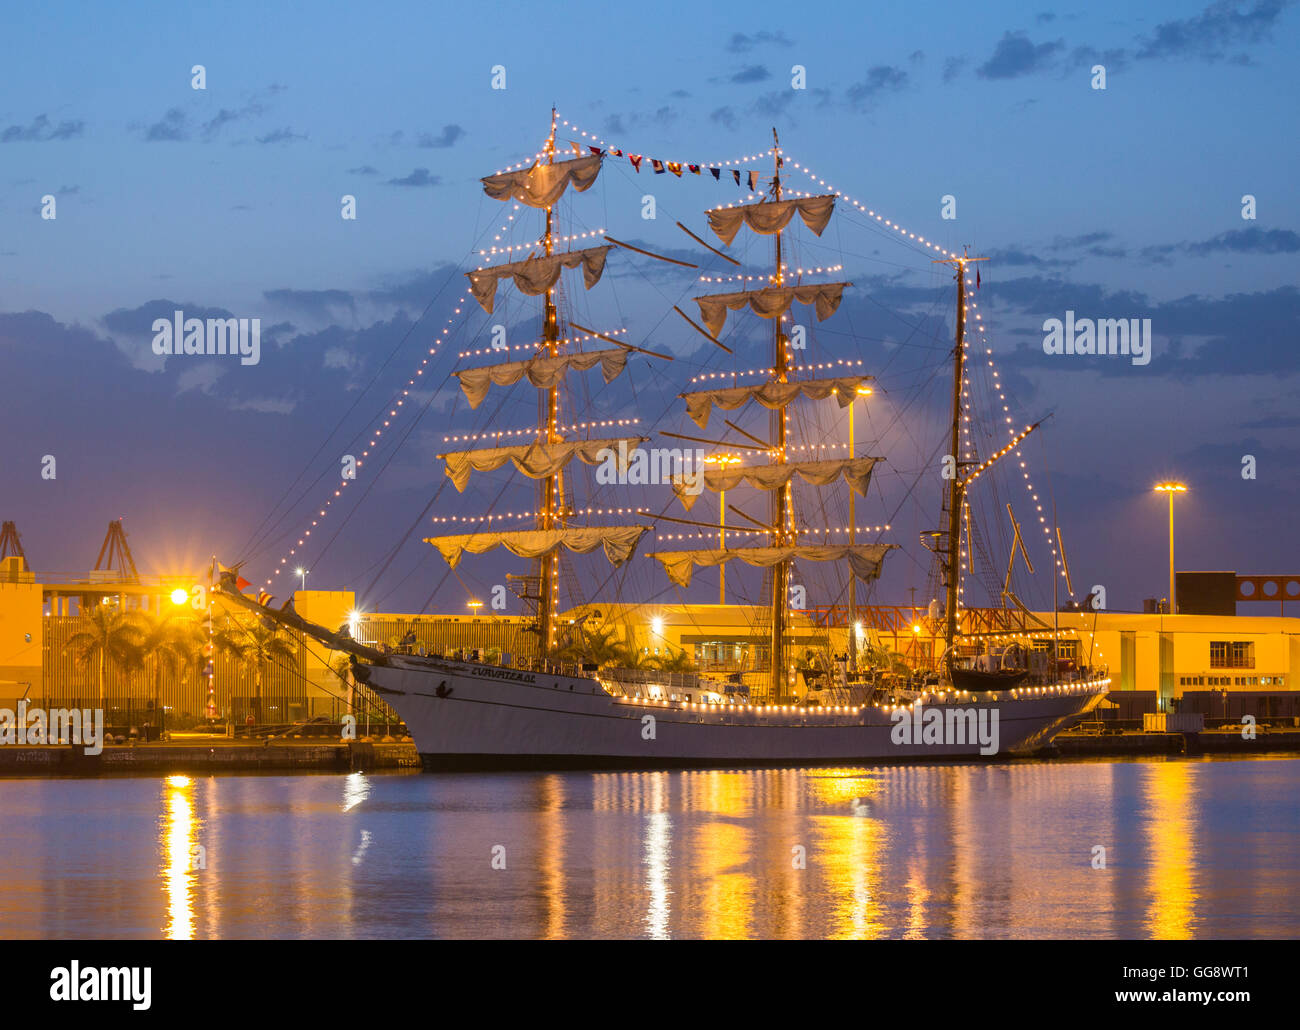 Crew climbing the rigging of Mexican navy training ship, Cuauhtemoc Stock Photo